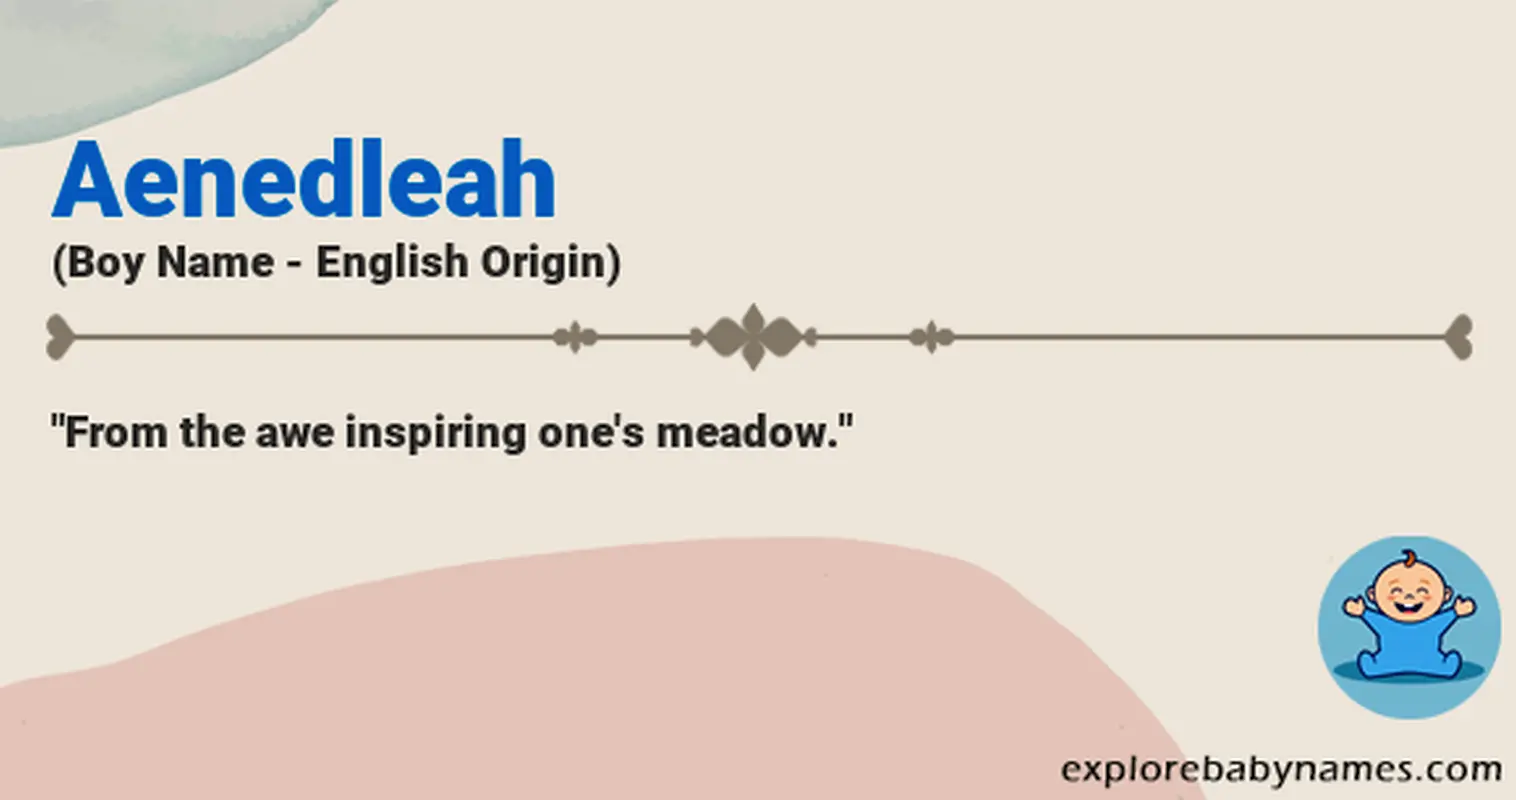 Meaning of Aenedleah